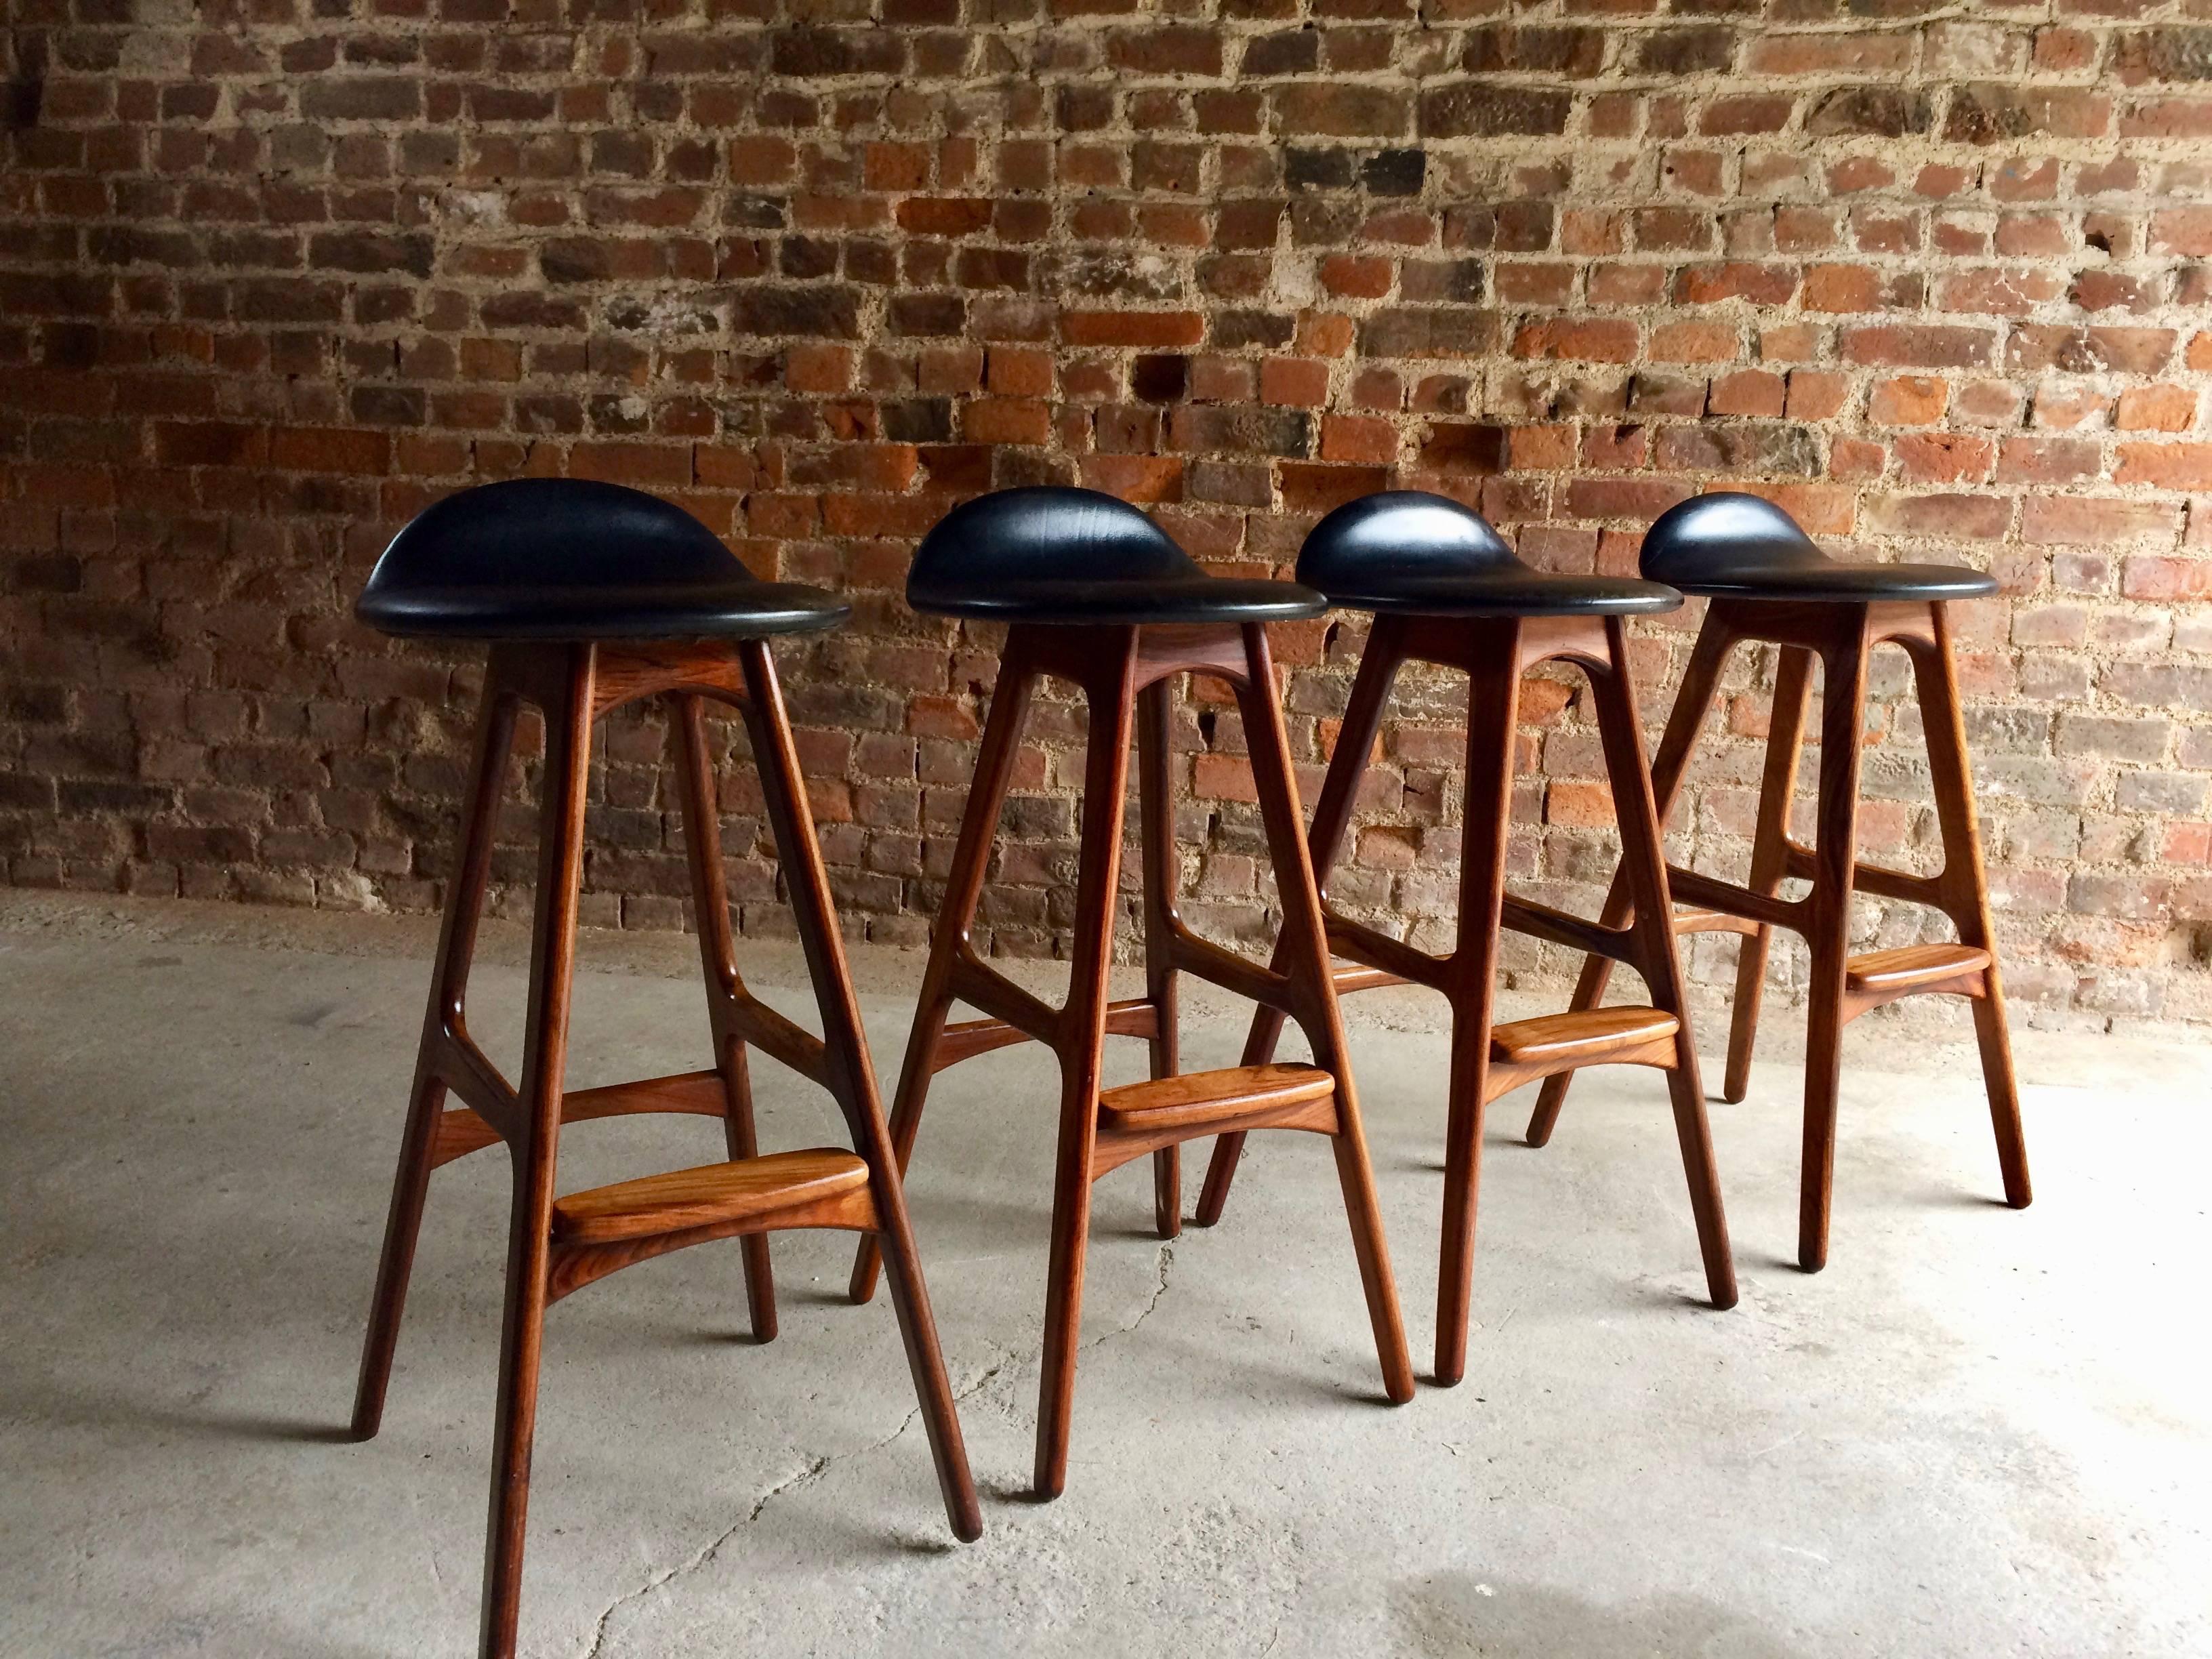 Stunning set of four Erik Buch for O D Møbler rosewood bar stools with black leather seats, circa 1960s, fabulous Danish design at its very best.

Erik Buch
O D Møbler
Rosewood
Bar stools
Set of four
Danish